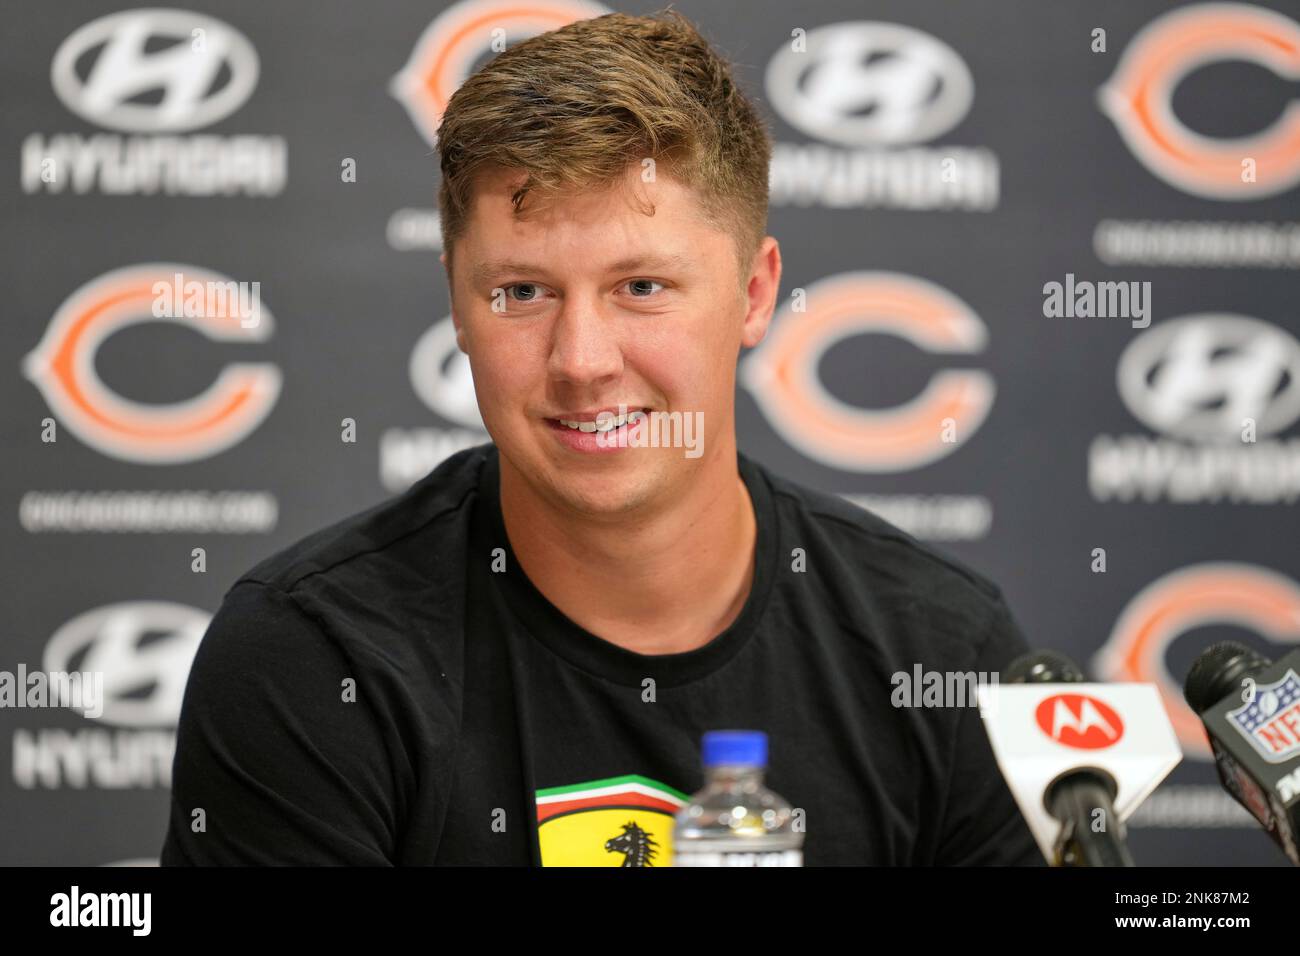 LAKE FOREST, IL - MAY 08: Chicago Bears Punter Trenton Gill (16